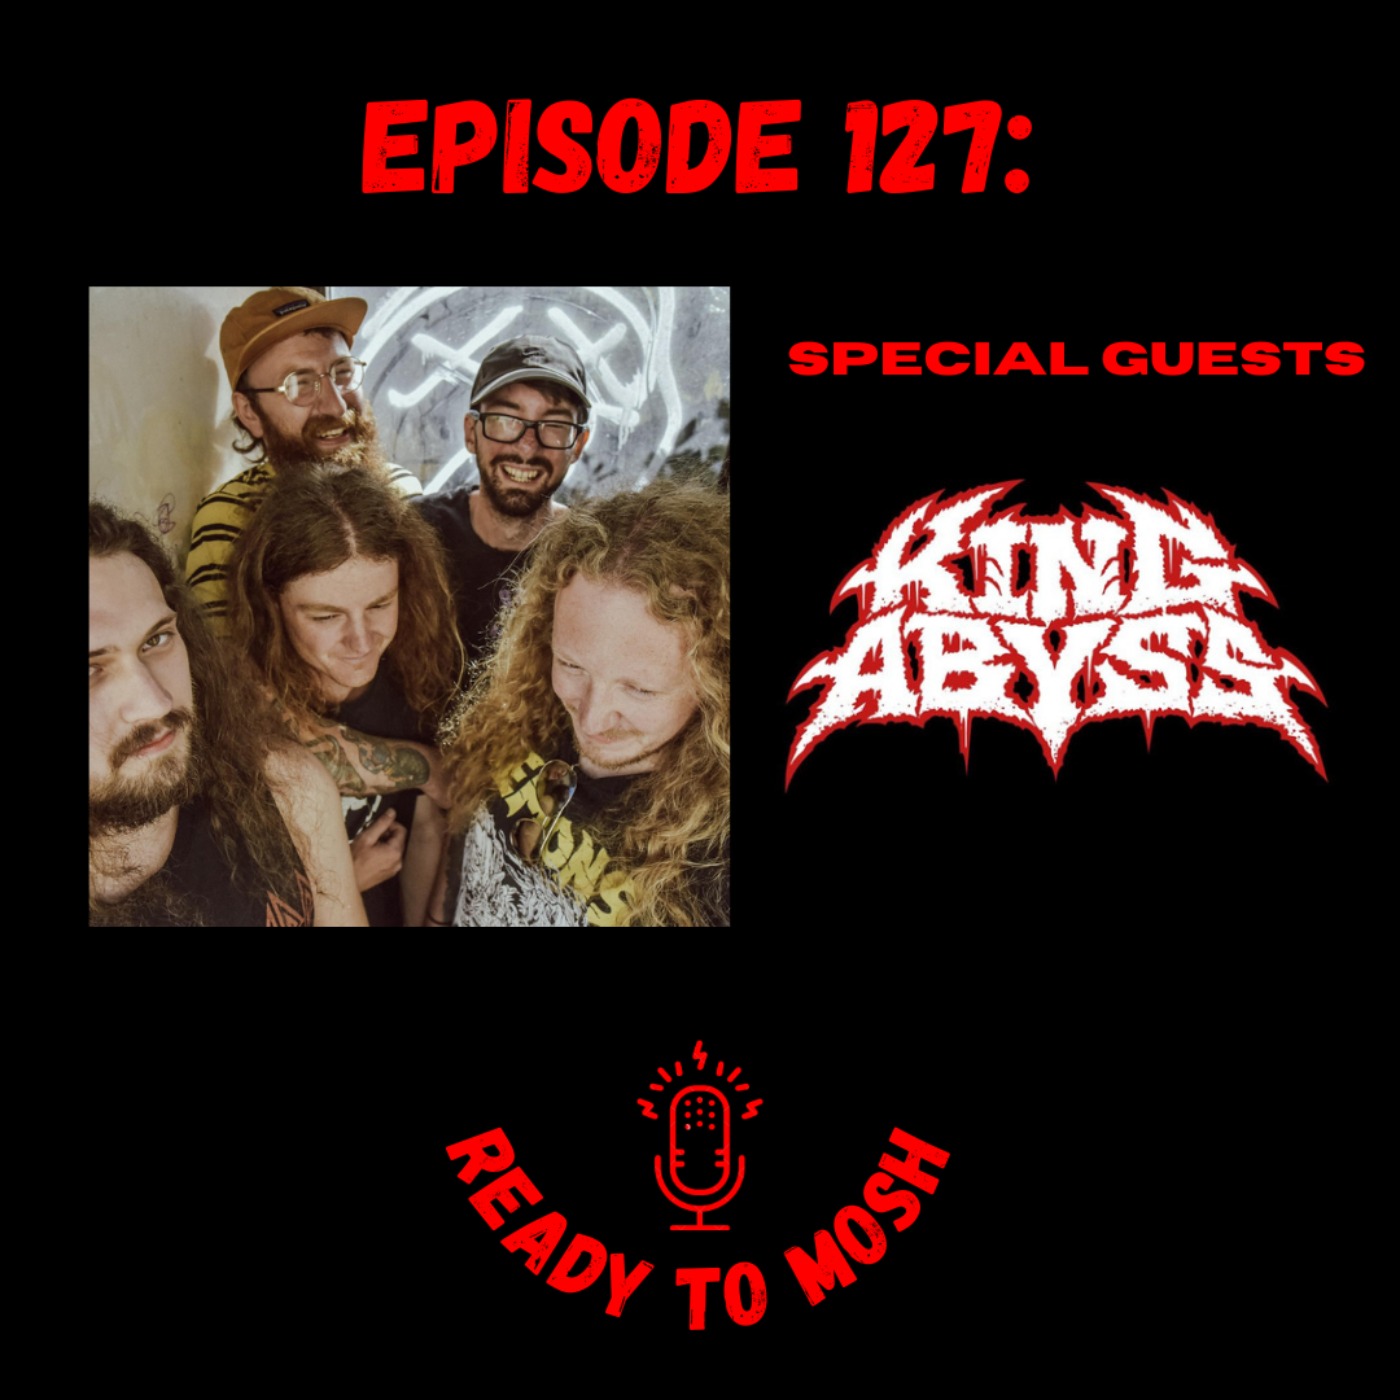 EP 127: Special Guests King Abyss